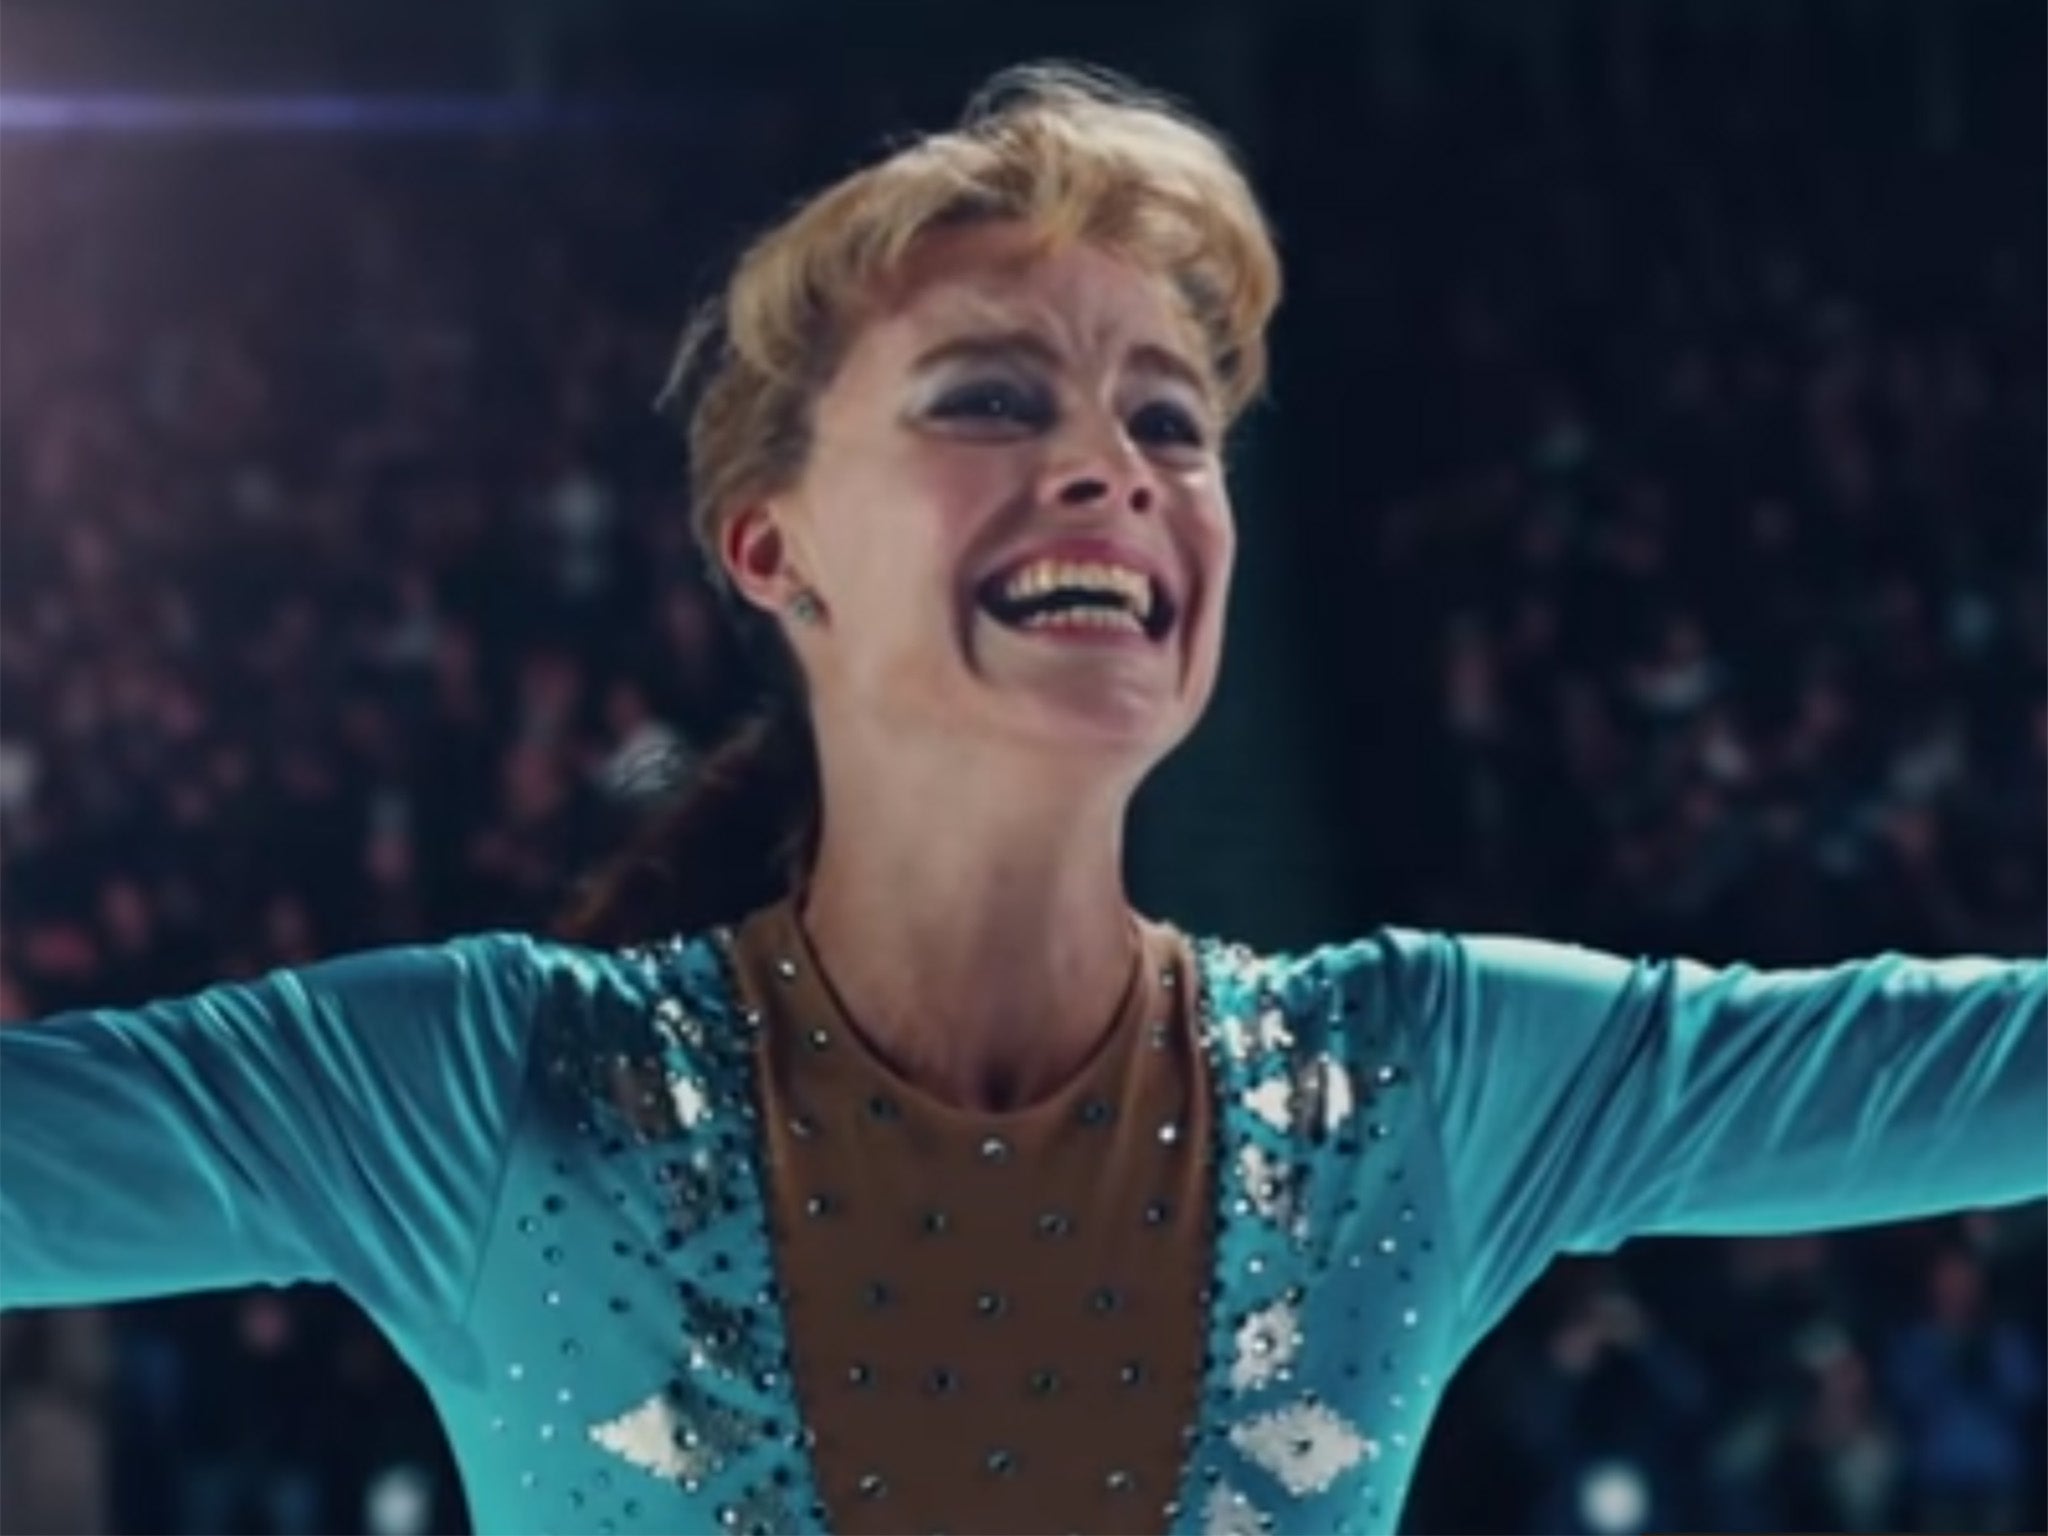 Margot Robbie recently launched LuckyChap Entertainment and has made films in which she starred such as skating biopic ‘I, Tonya’ (above) and thriller ‘Terminal’ through the company